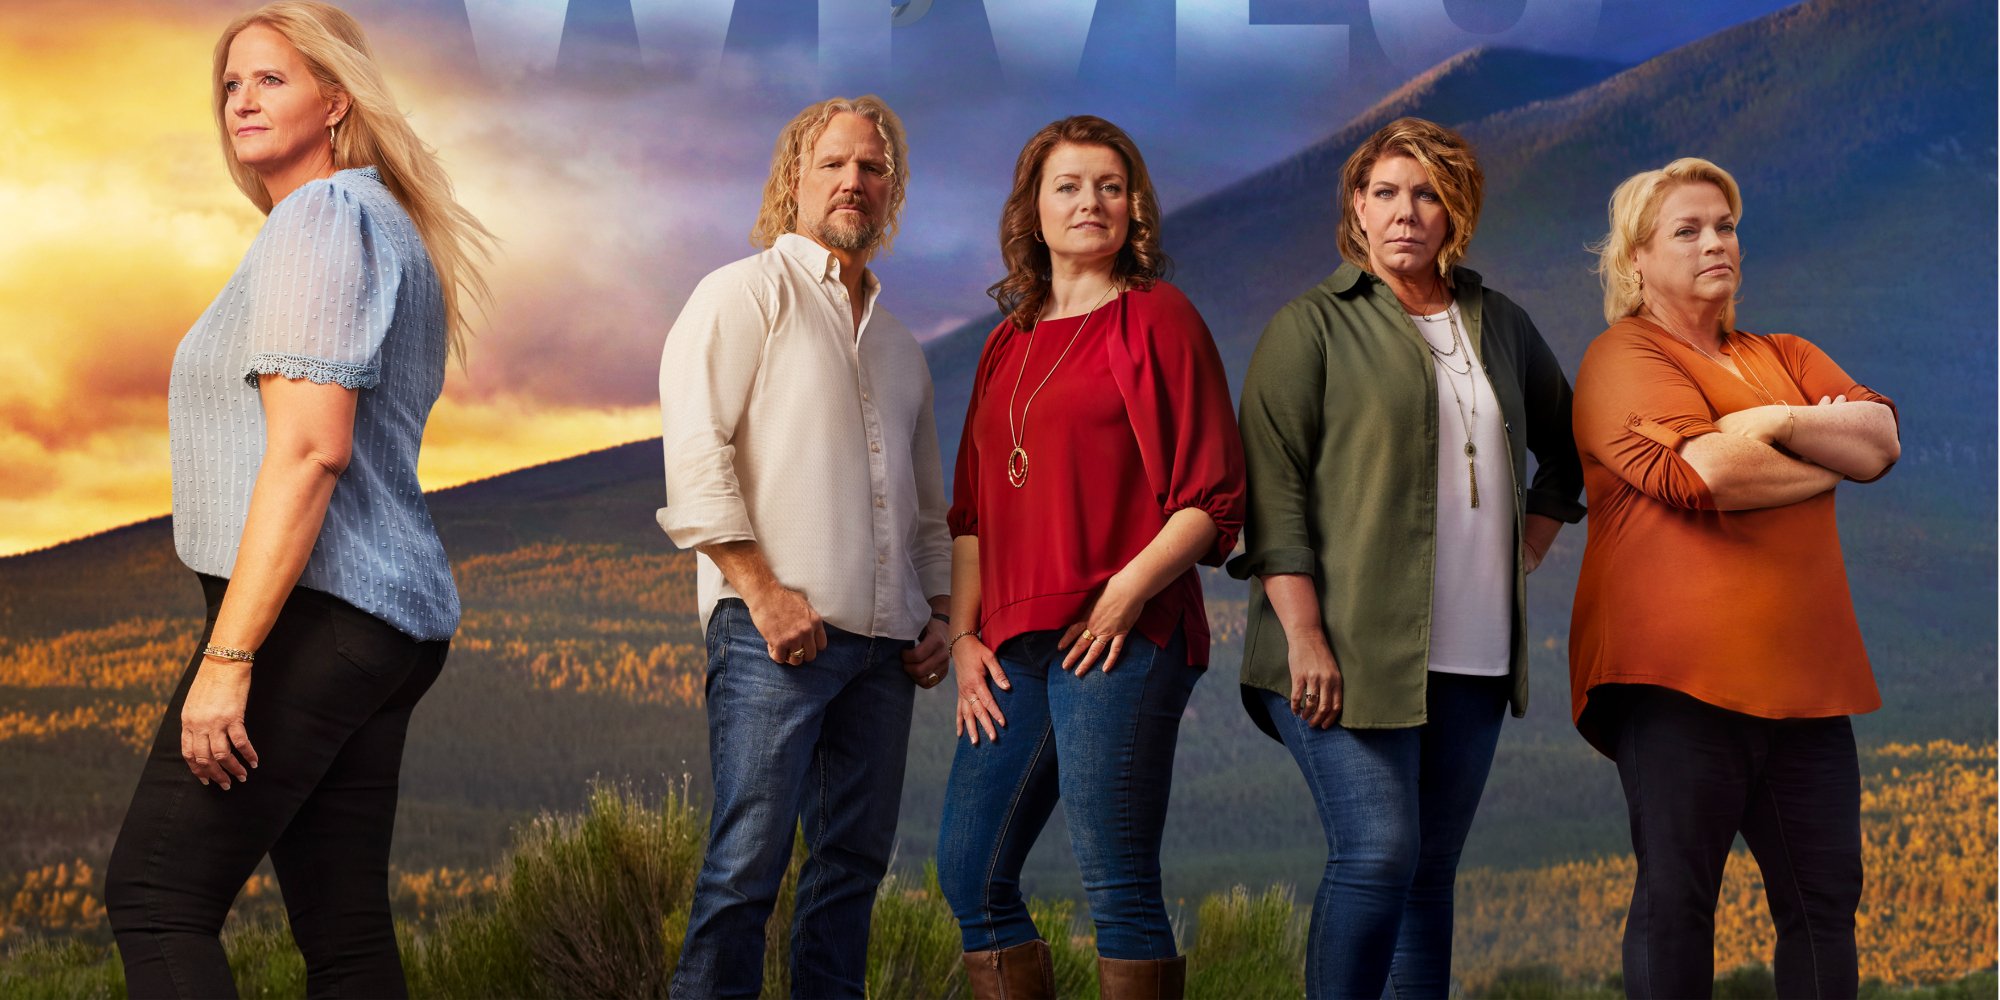 ‘Sister Wives’: Kody Brown Proves He Doesn’t Understand Marriage Based on His Proposition for Christine Brown